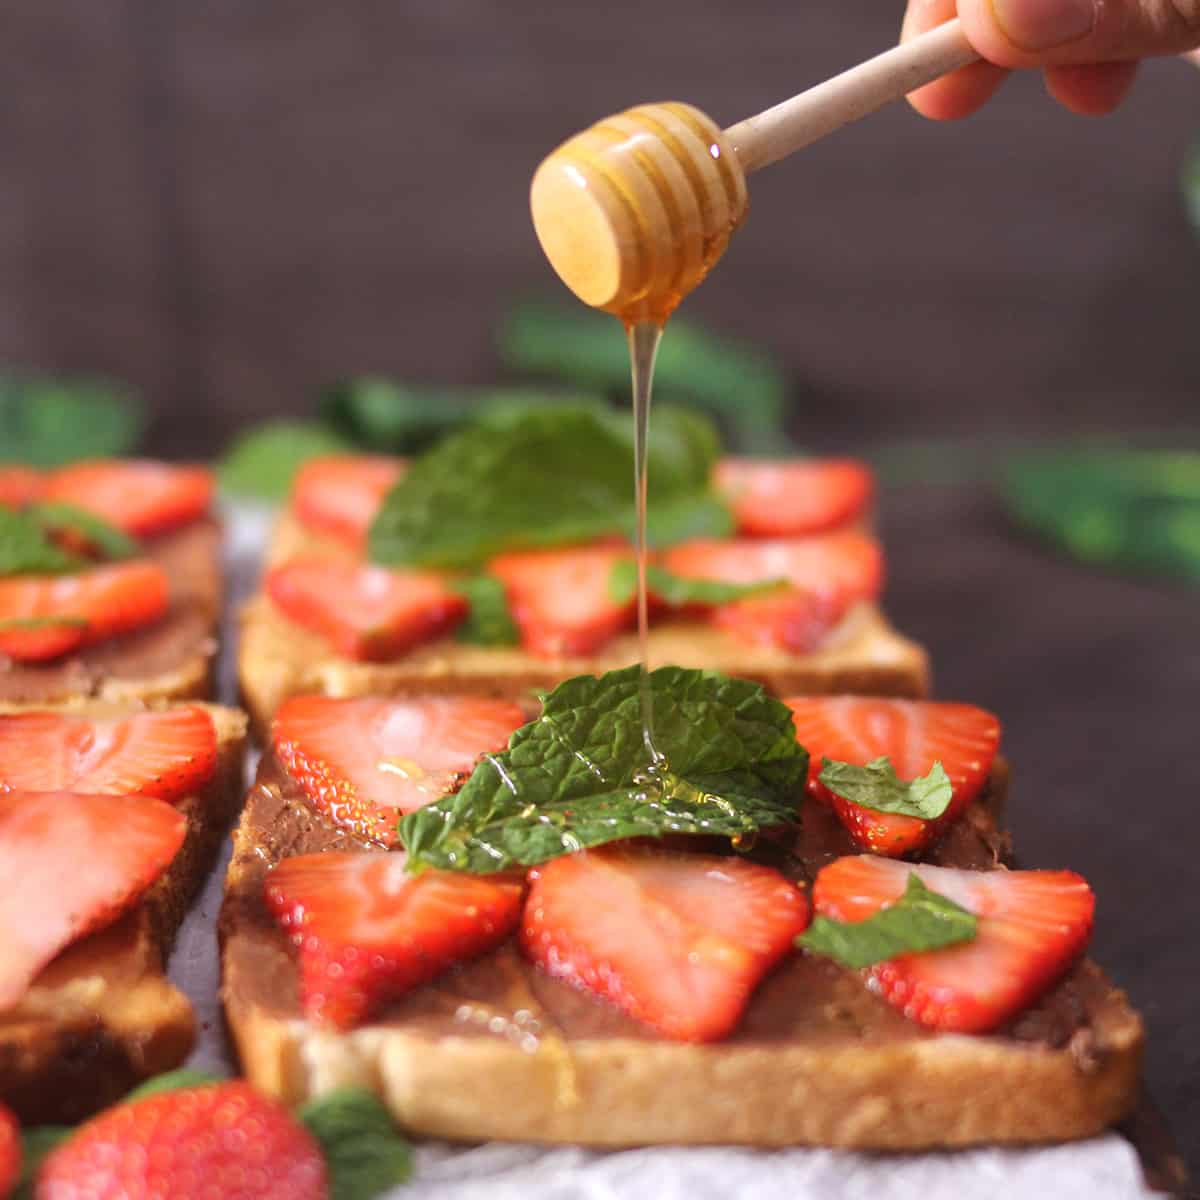 Drizzle honey on the strawberry bread toast using a wooden honey dipper.